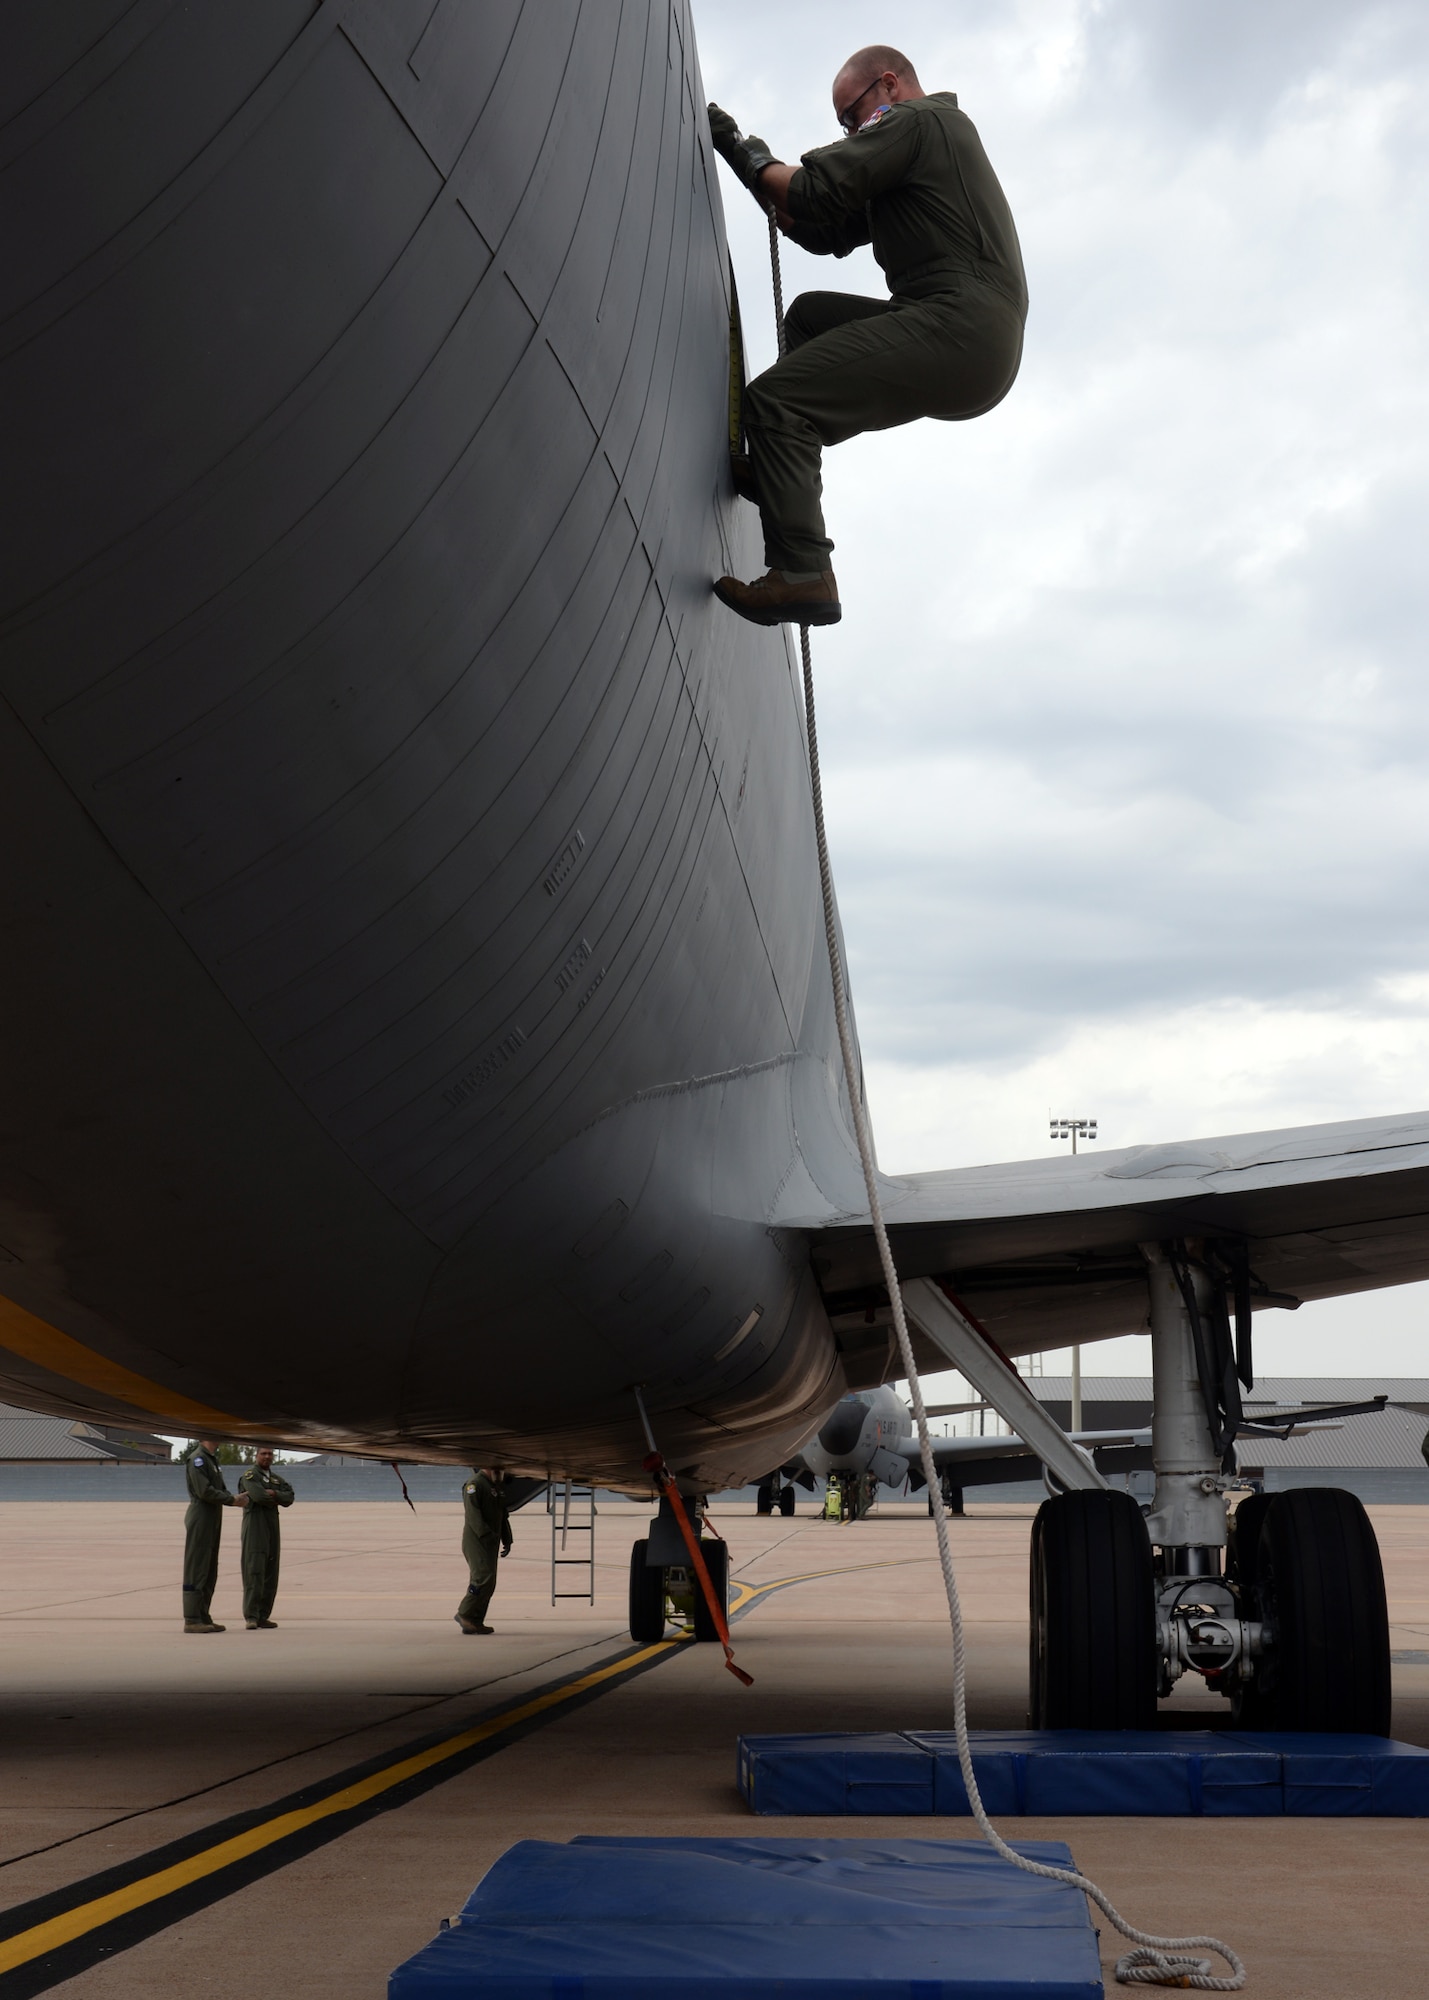 A student with the 97th Training Squadron climbs down from a 54th Air Refueling Squadron KC-135 Stratotanker refueling aircraft Sept. 24, 2014, at Altus Air Force Base, Okla. Instructors from the 54th ARS taught the students how to safely evacuate the aircraft in an emergency situation. (U.S. Air Force photo/Senior Airman Franklin R. Ramos)